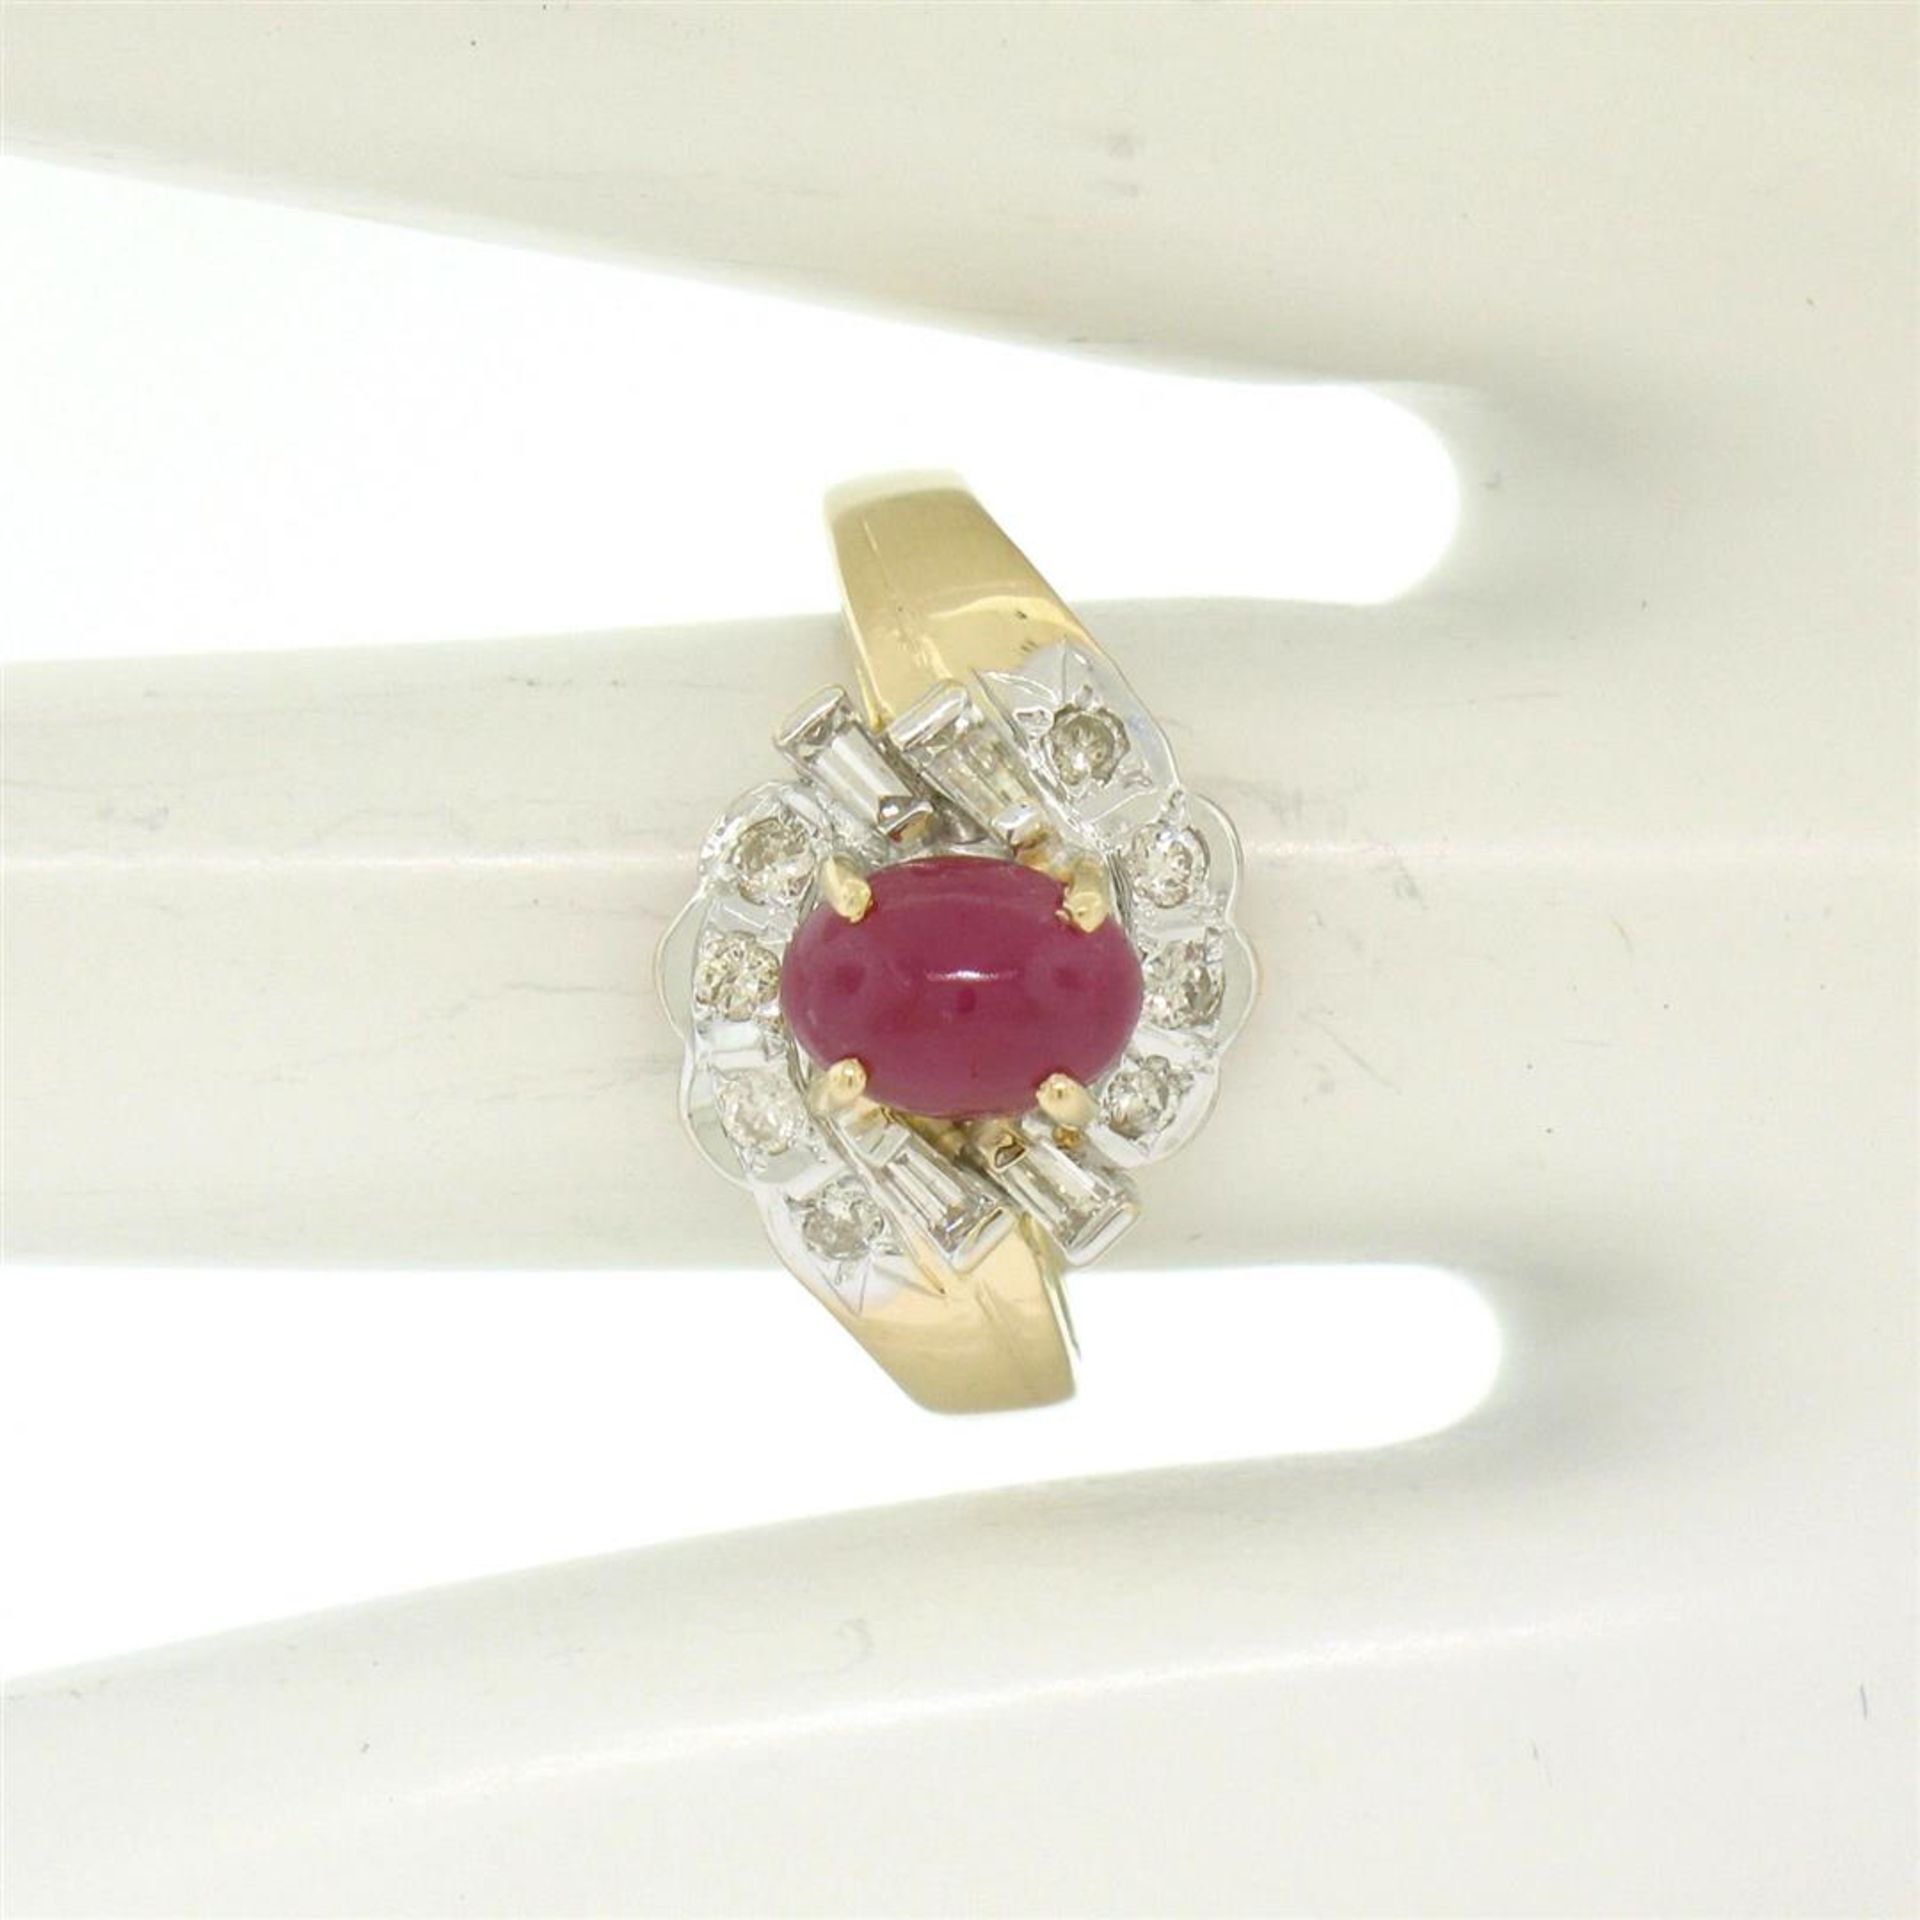 14kt White and Yellow Gold Cabochon Ruby and Diamond Ring - Image 7 of 7